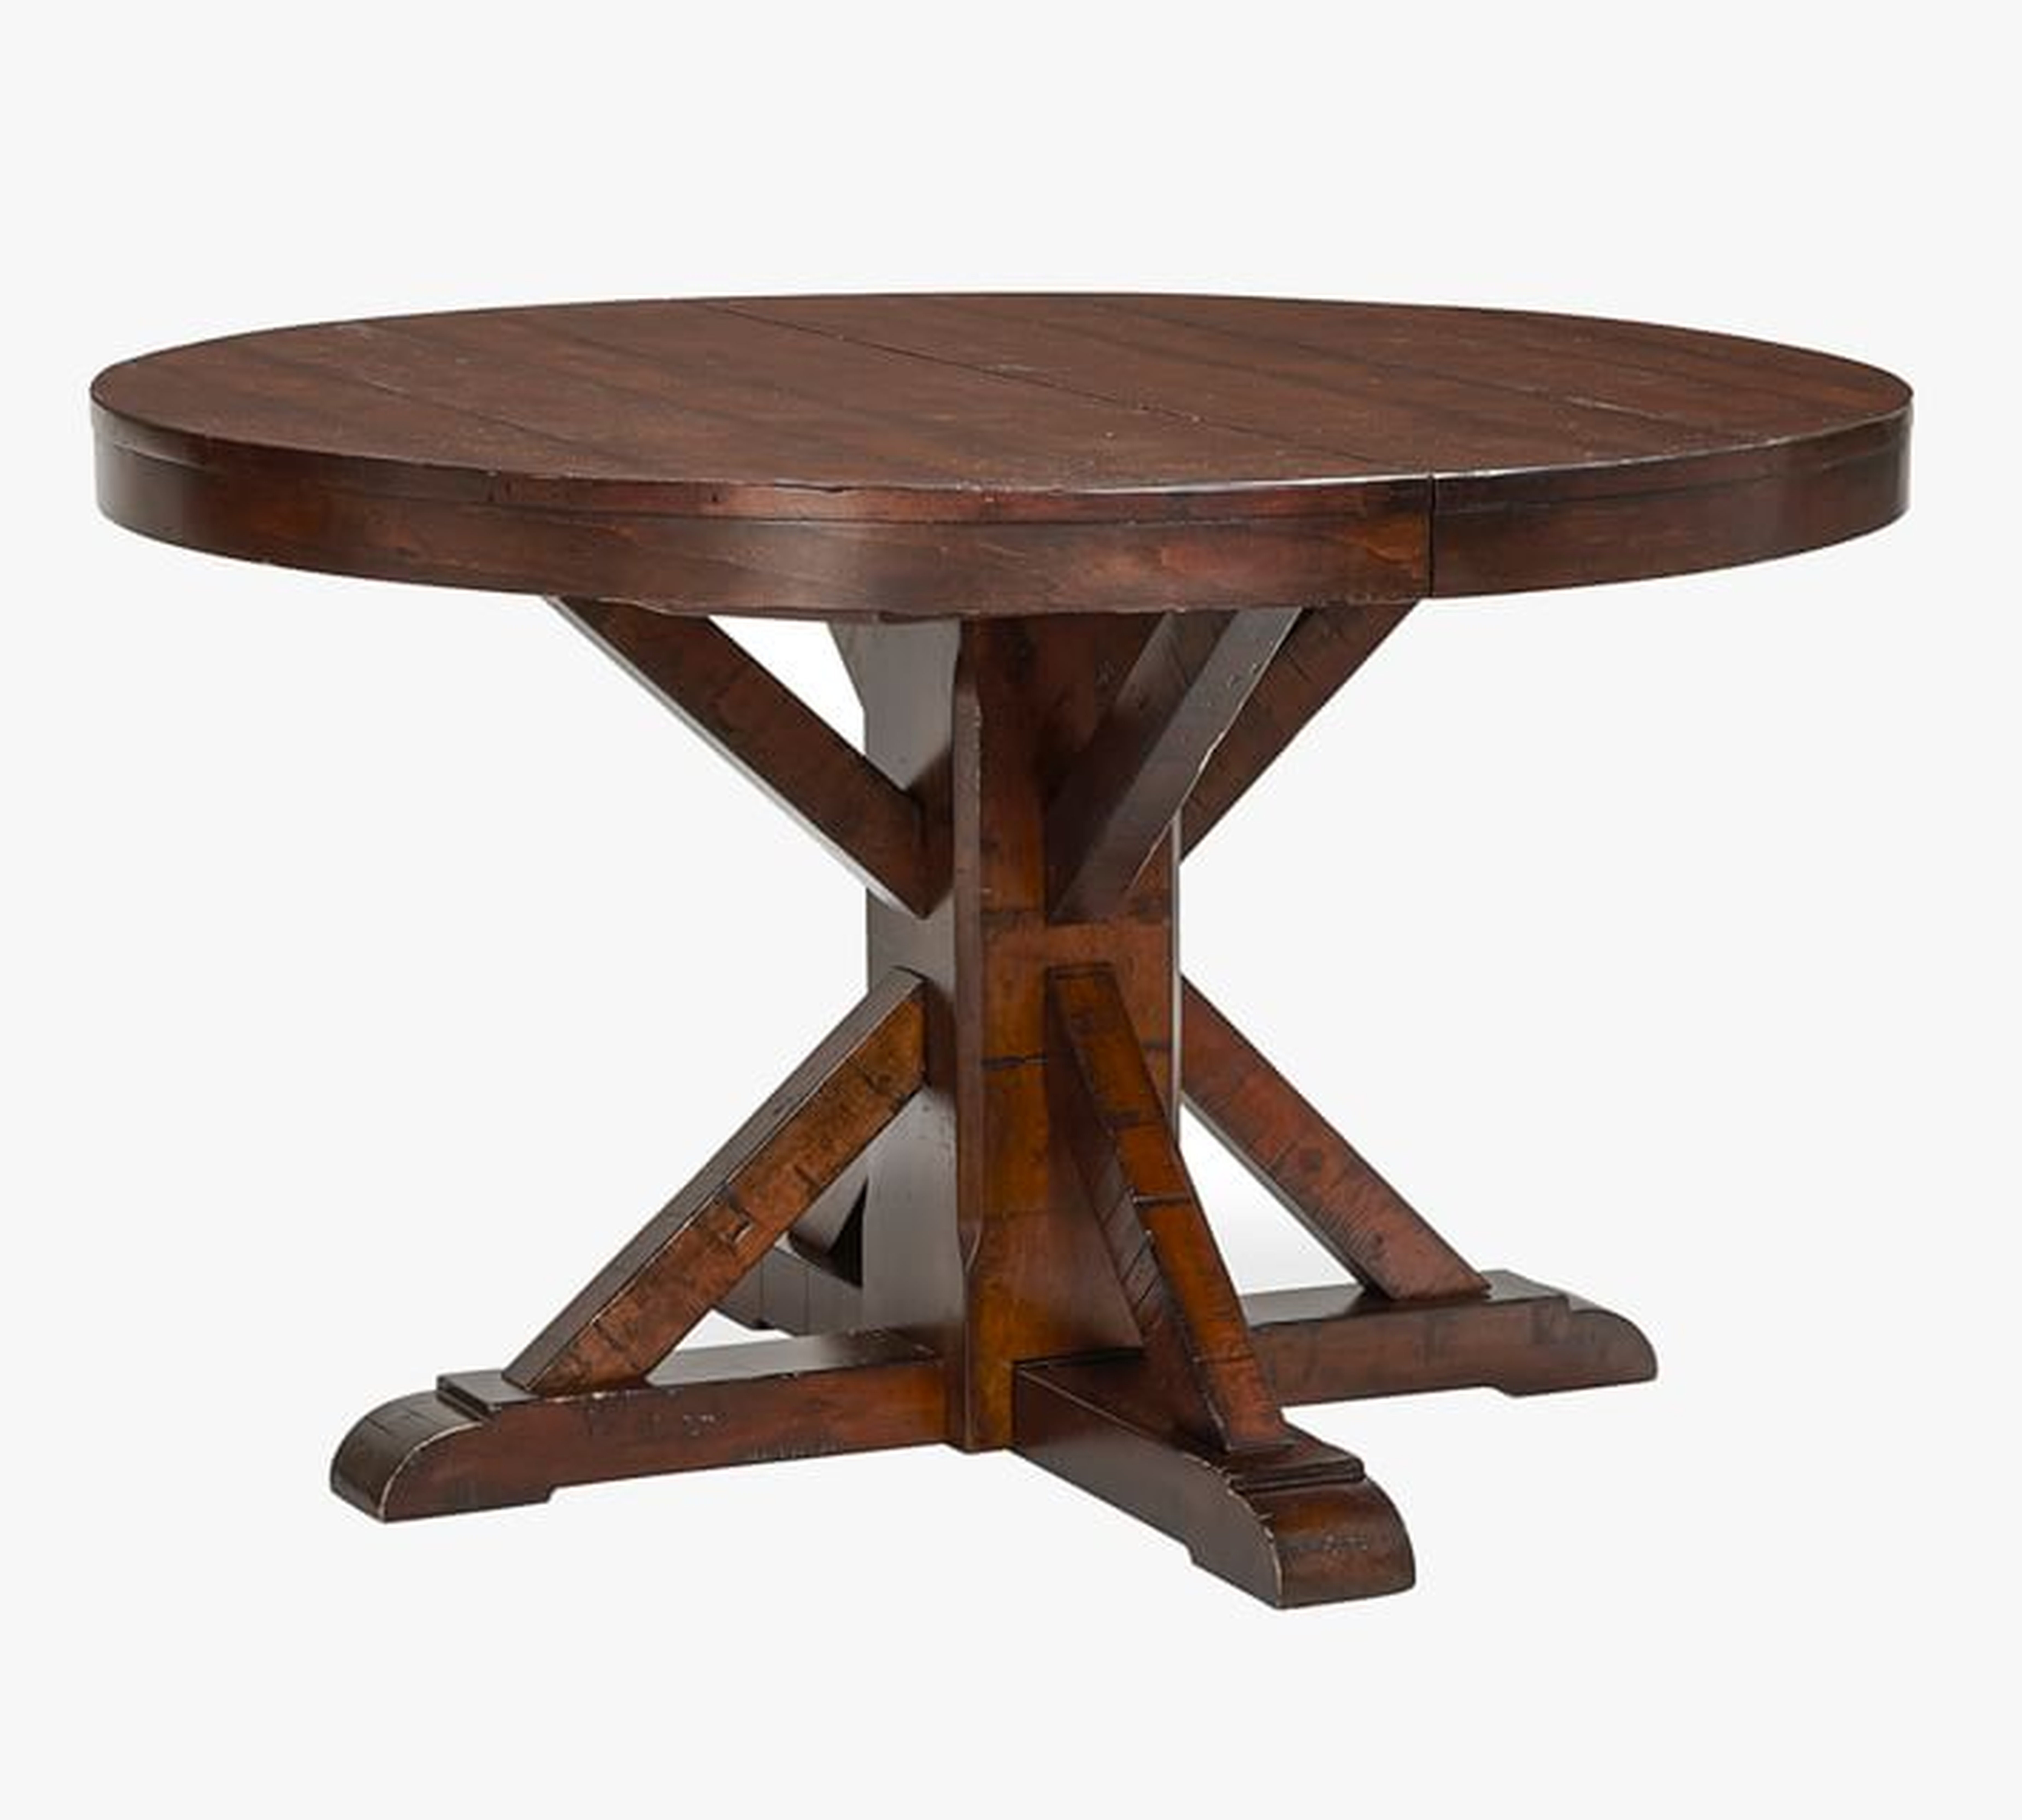 Benchwright Round Pedestal Extending Dining Table, Rustic Mahogany, 48" - 72" L - Pottery Barn